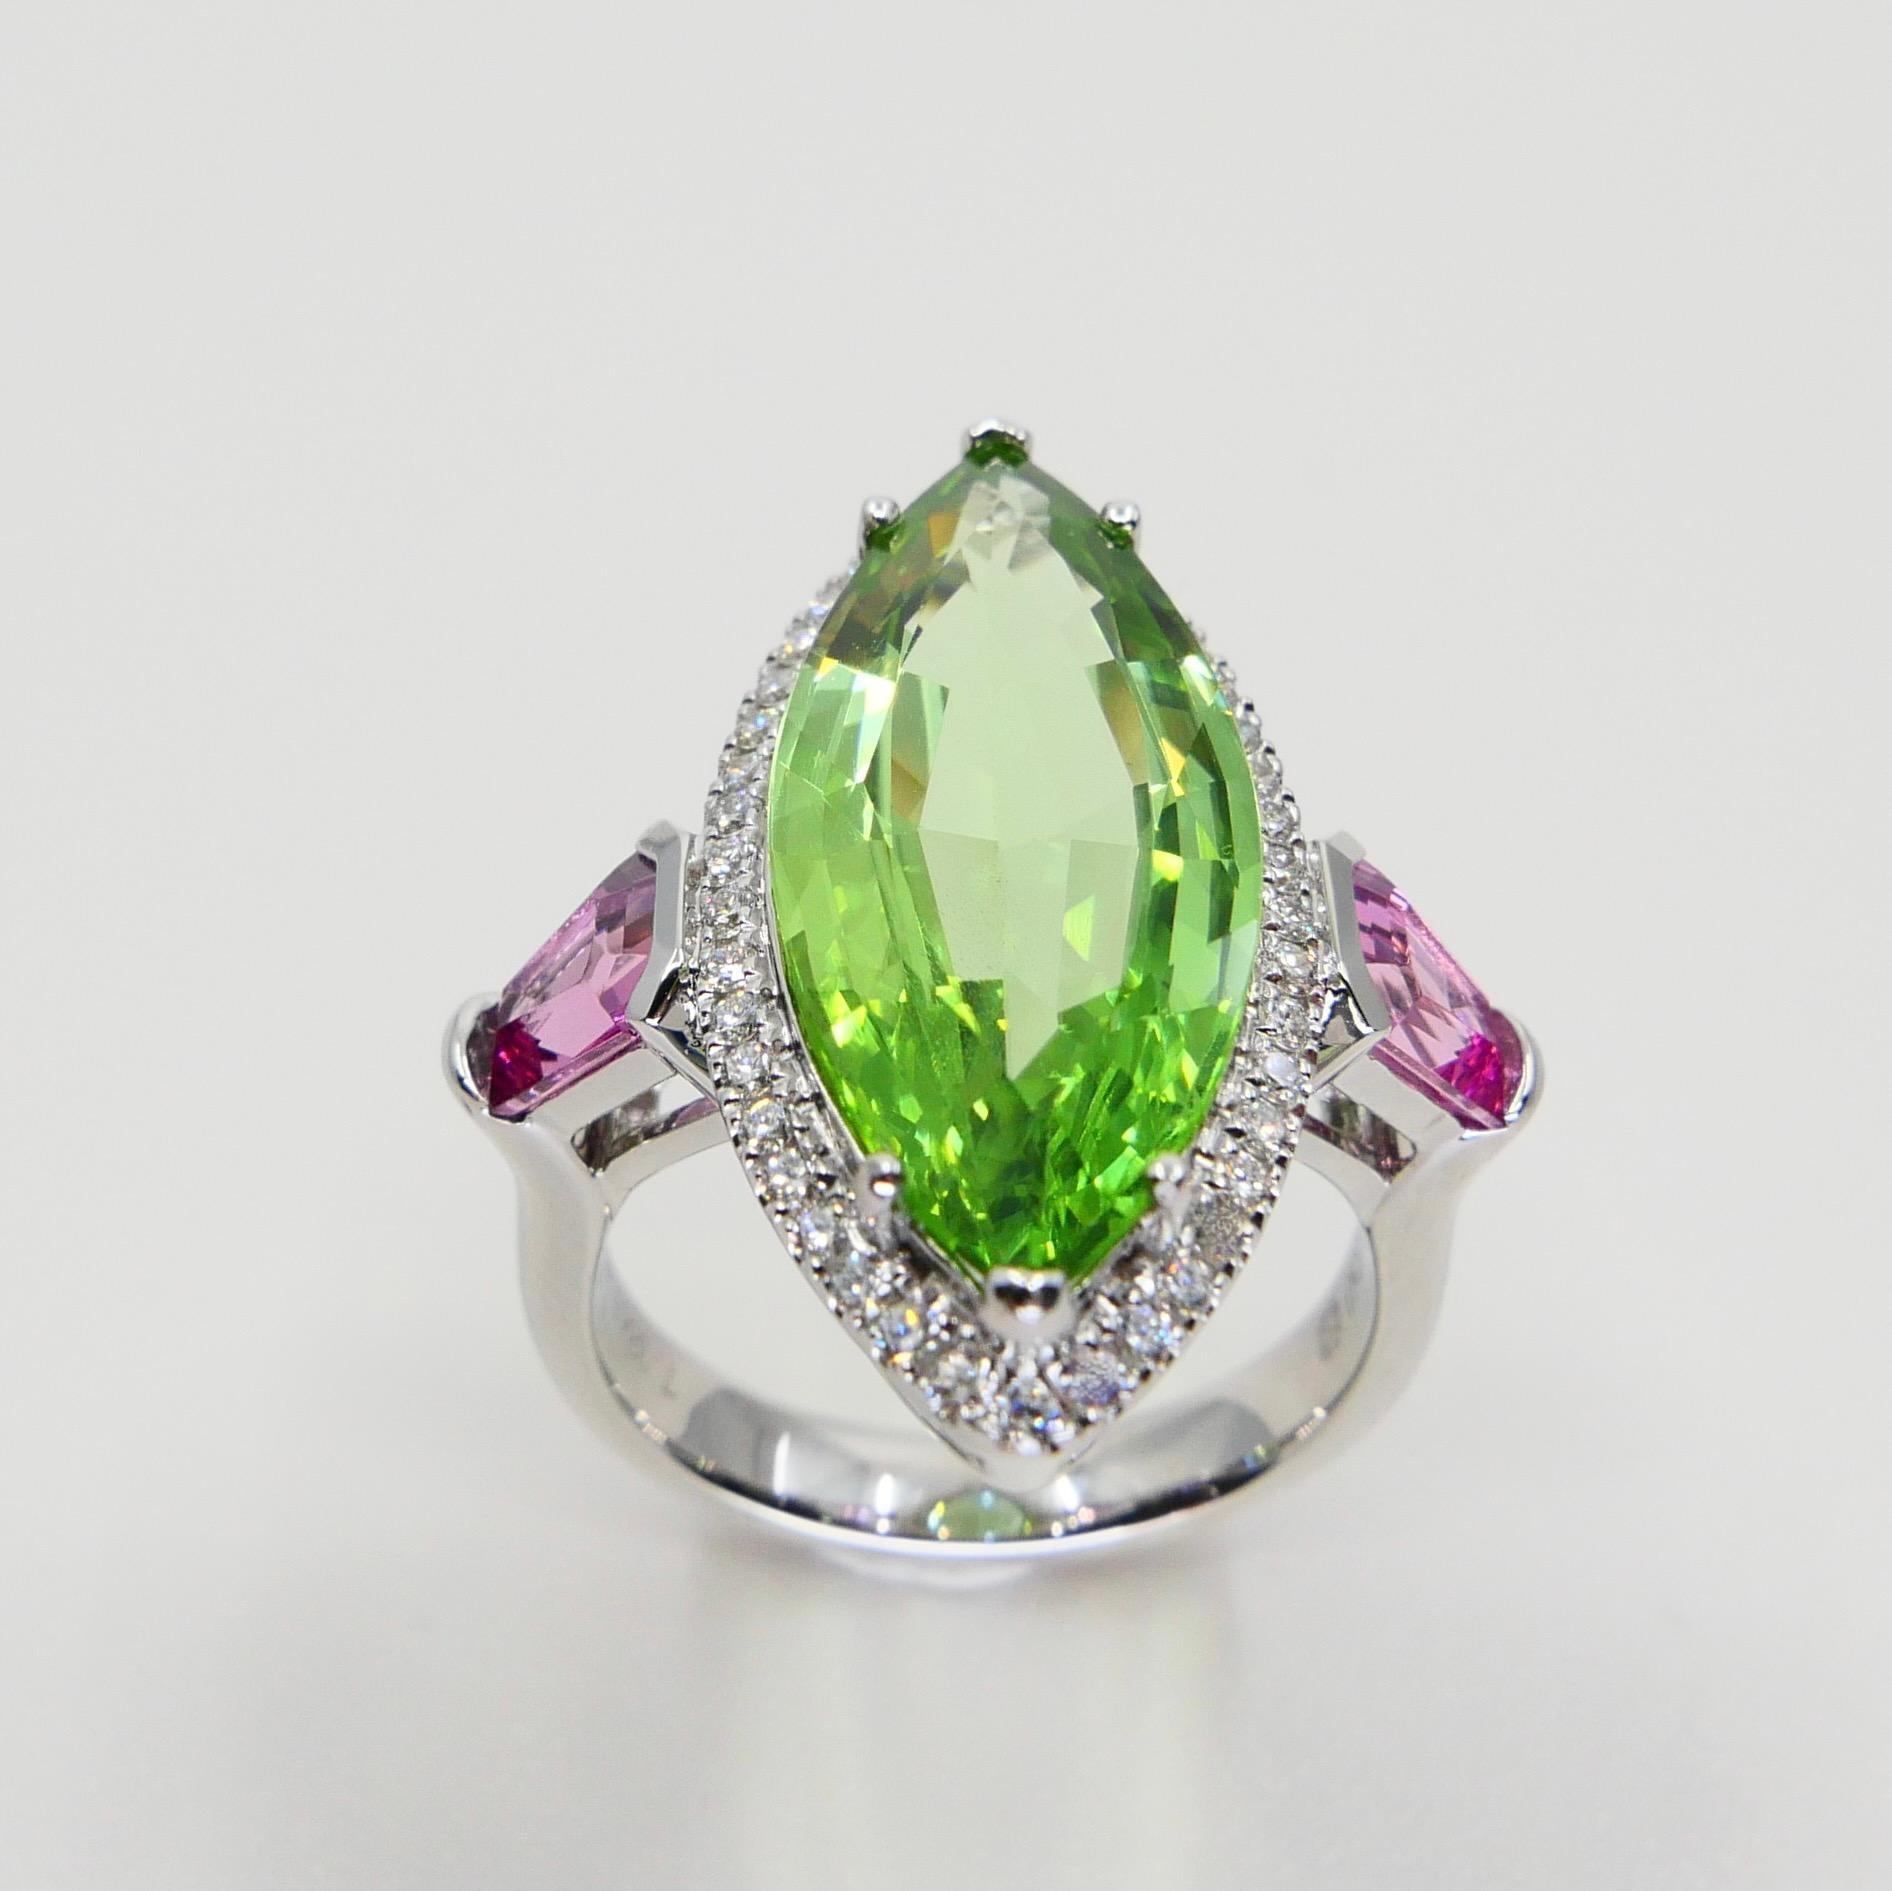 Natural Peridot 7.38 Cts, Pink Spinel & Diamond Cocktail Ring, Statement Piece 3